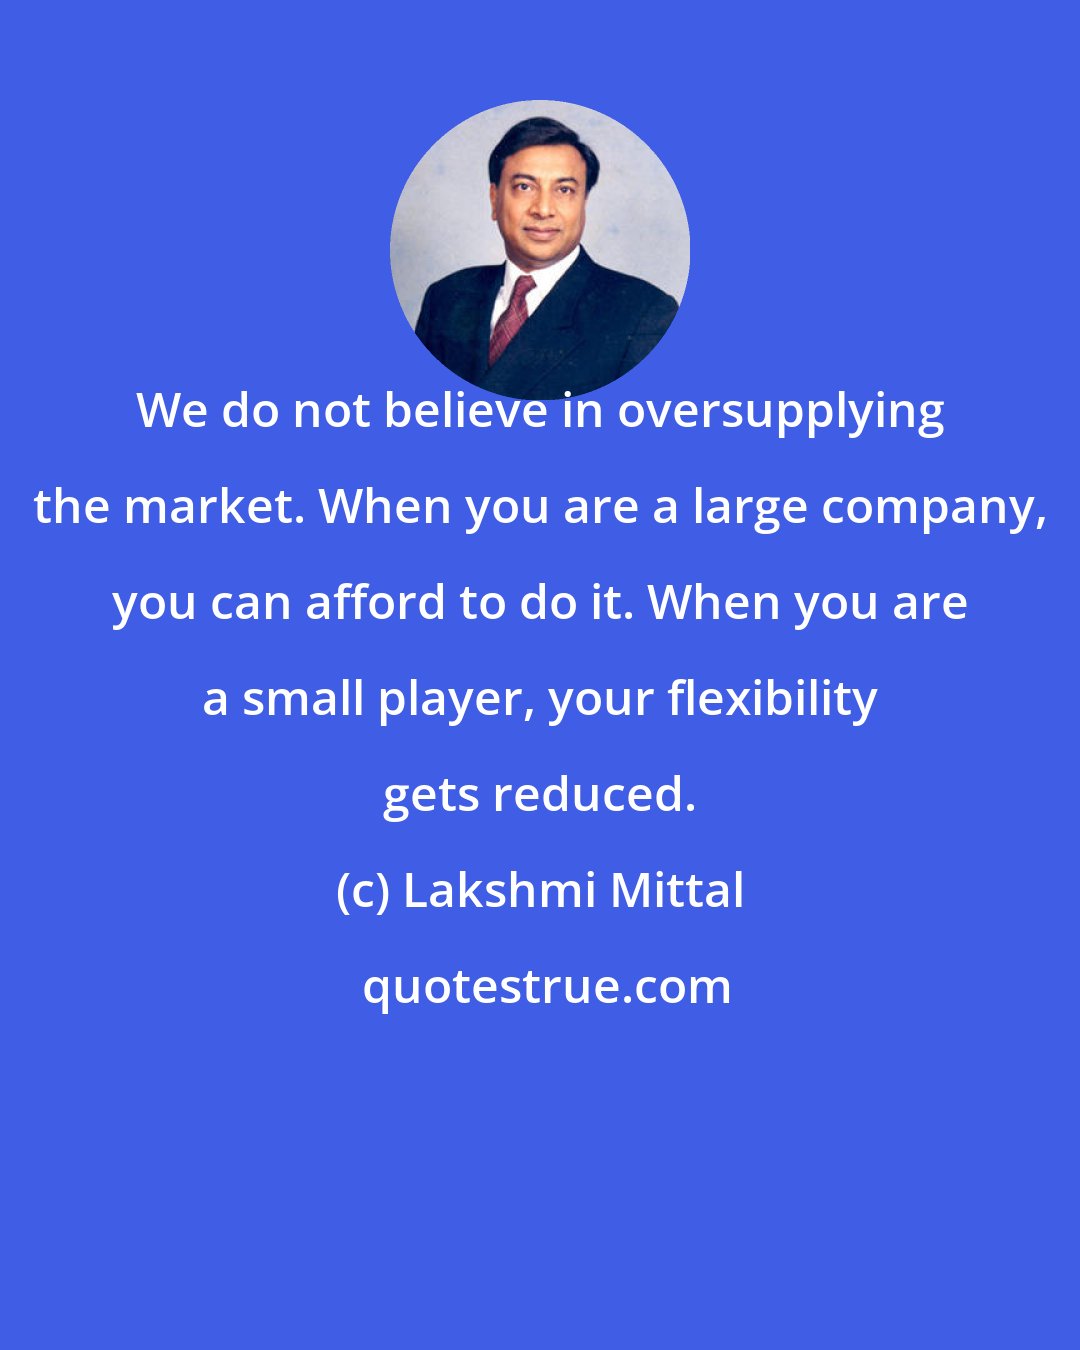 Lakshmi Mittal: We do not believe in oversupplying the market. When you are a large company, you can afford to do it. When you are a small player, your flexibility gets reduced.